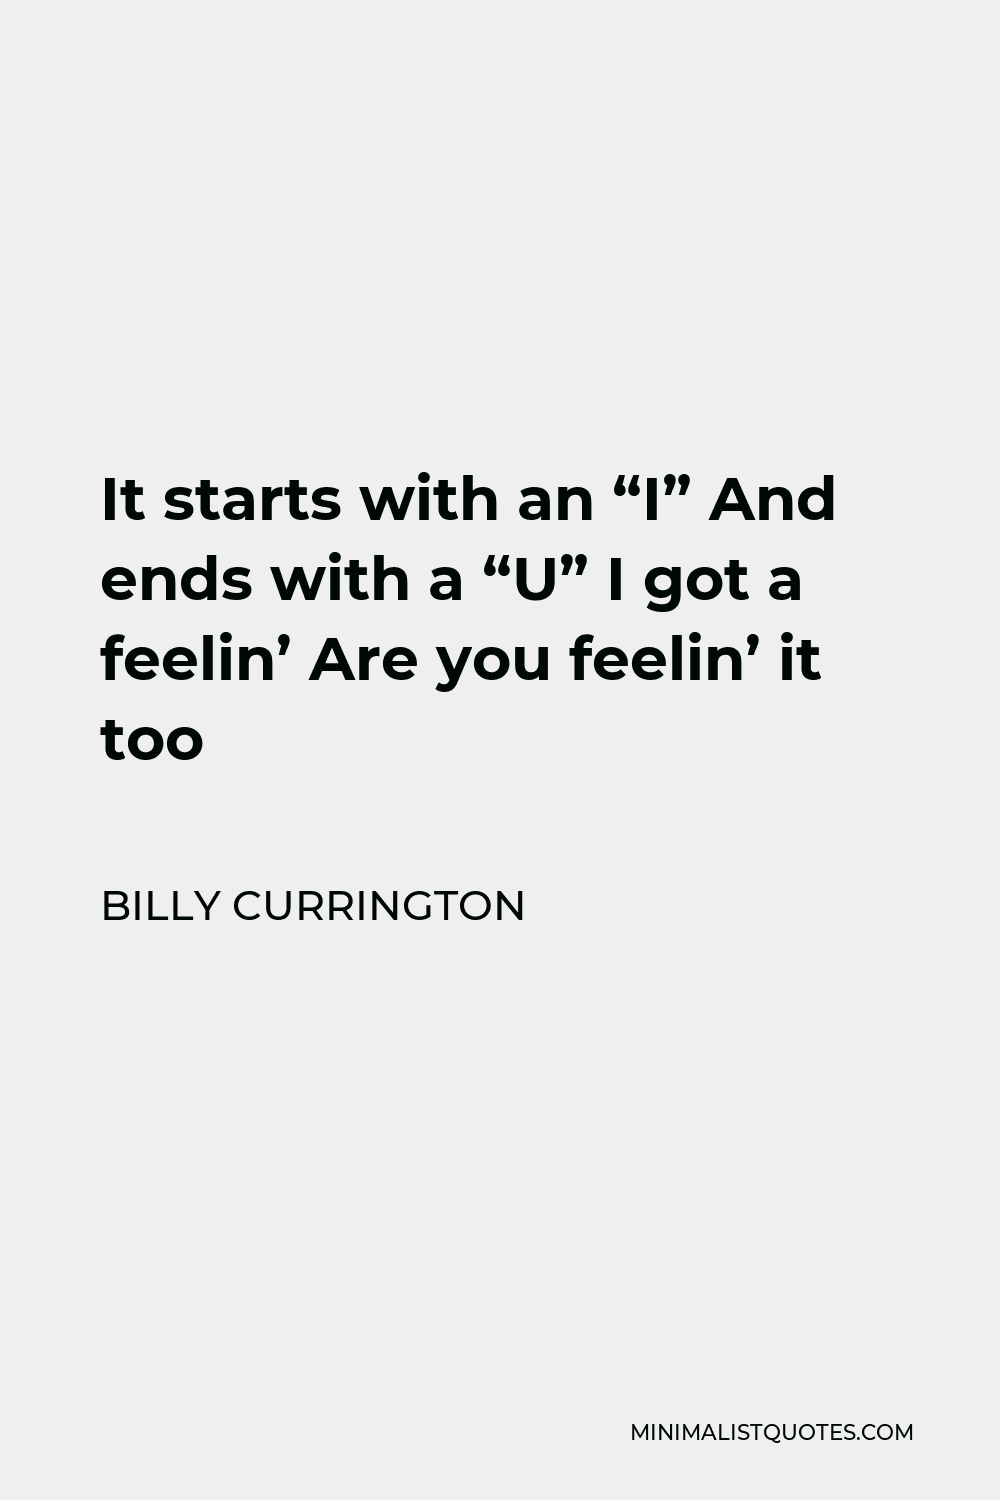 Billy Currington Quote - It starts with an “I” And ends with a “U” I got a feelin’ Are you feelin’ it too